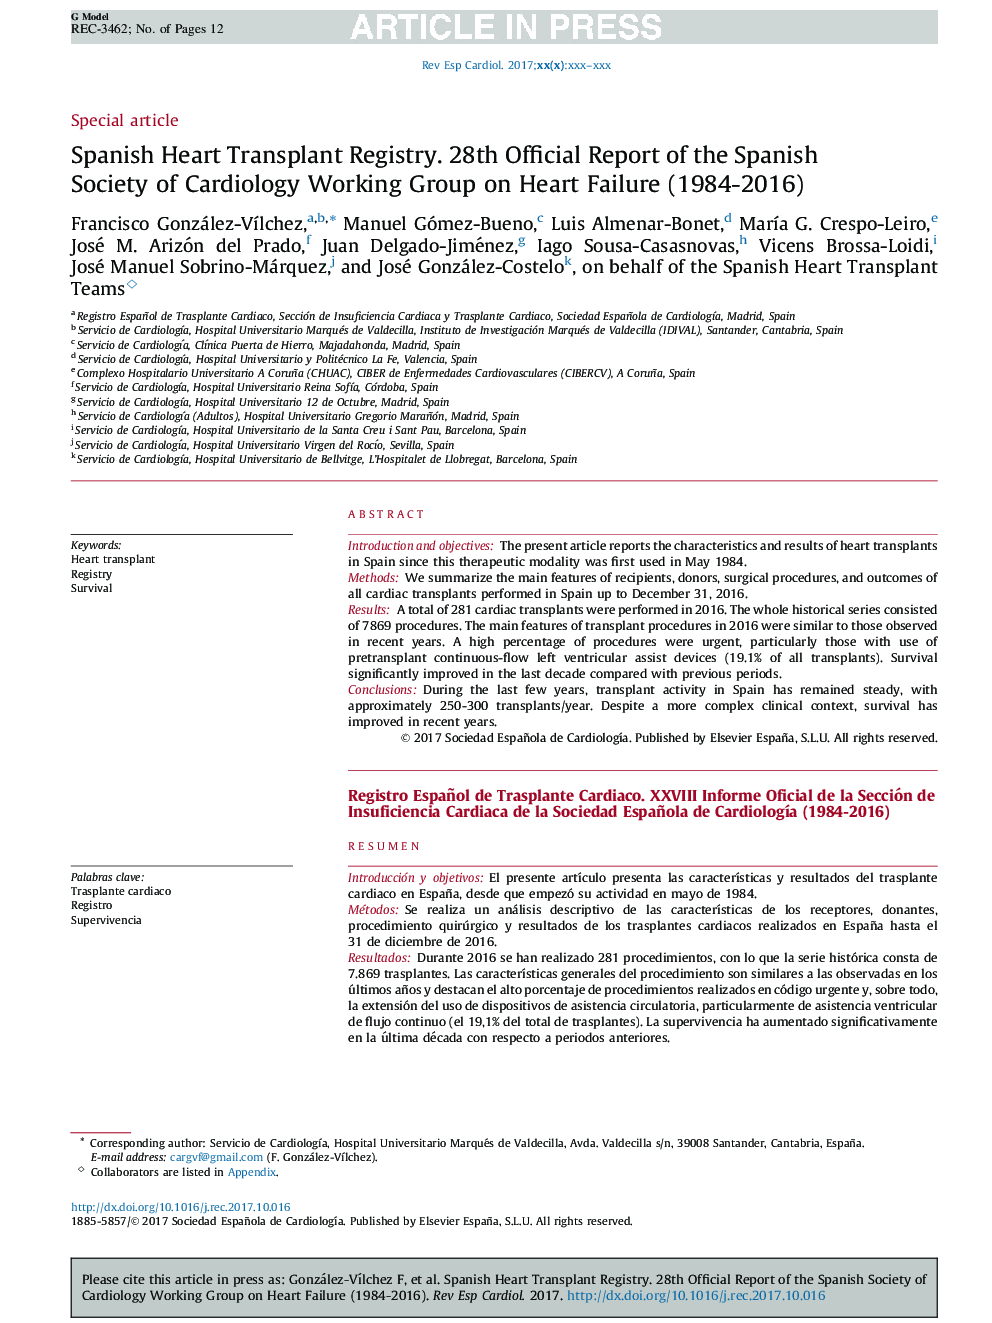 Spanish Heart Transplant Registry. 28th Official Report of the Spanish Society of Cardiology Working Group on Heart Failure (1984-2016)